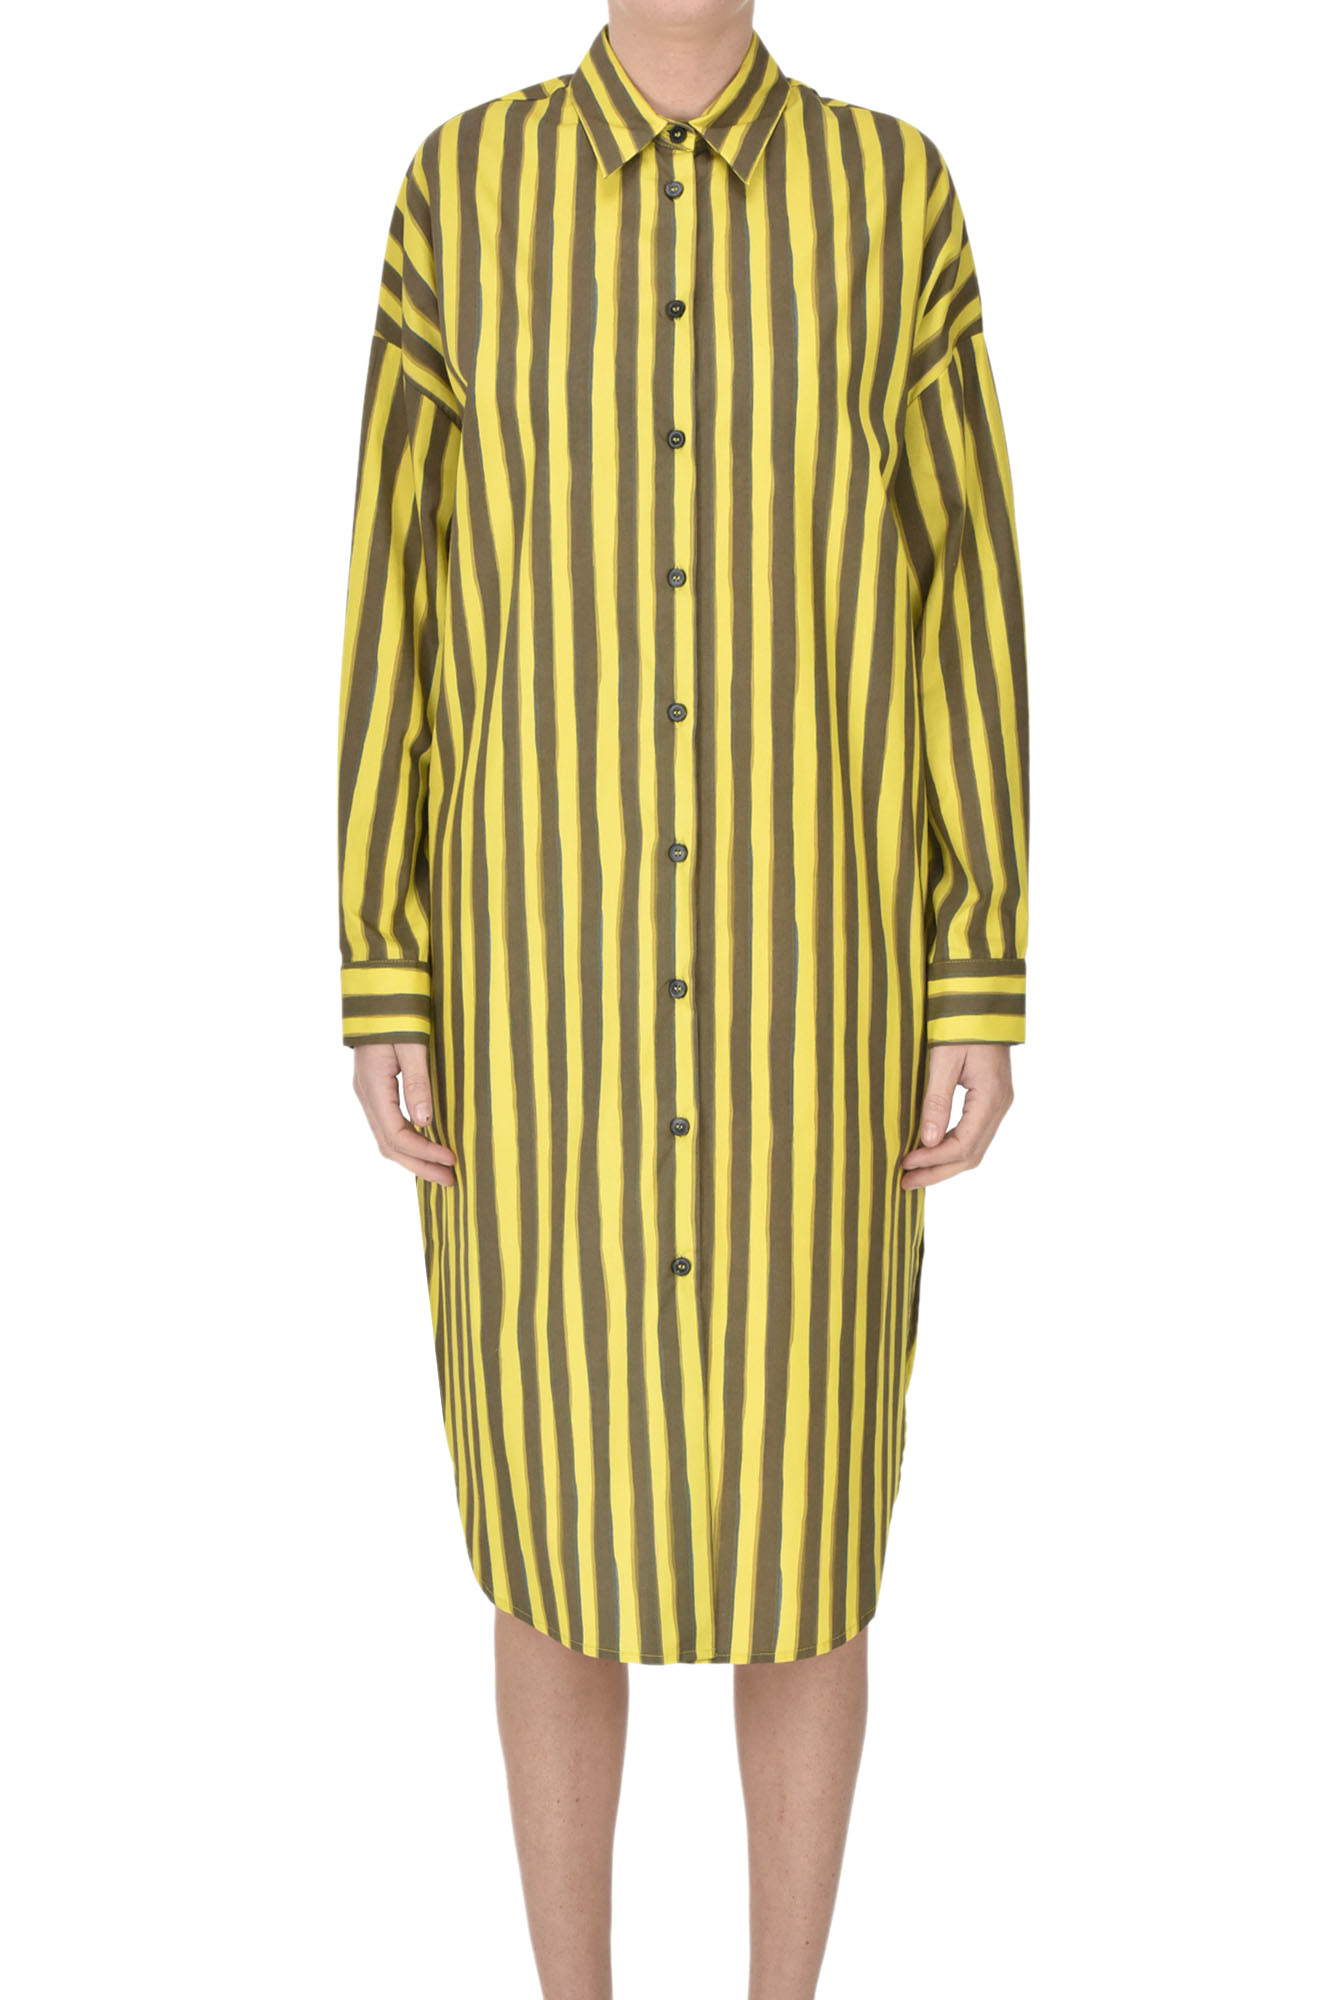 Pdr Phisique Du Role Striped Shirt Dress In Yellow